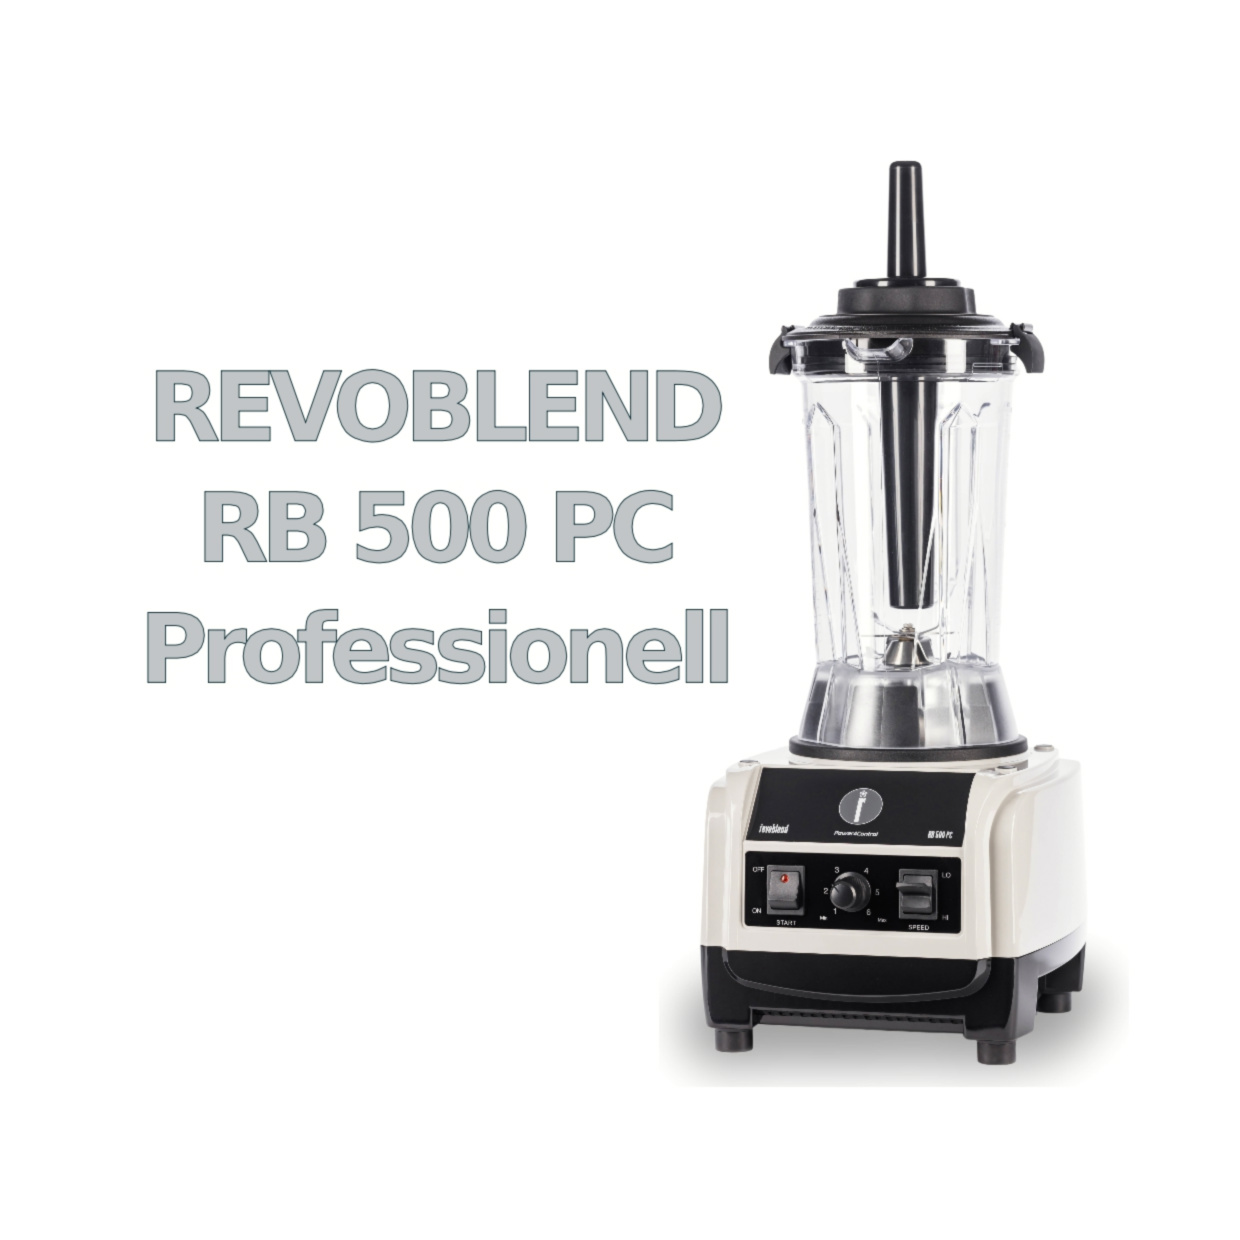 Neues Modell: Revoblend RB 500 PC Papyrusweiss